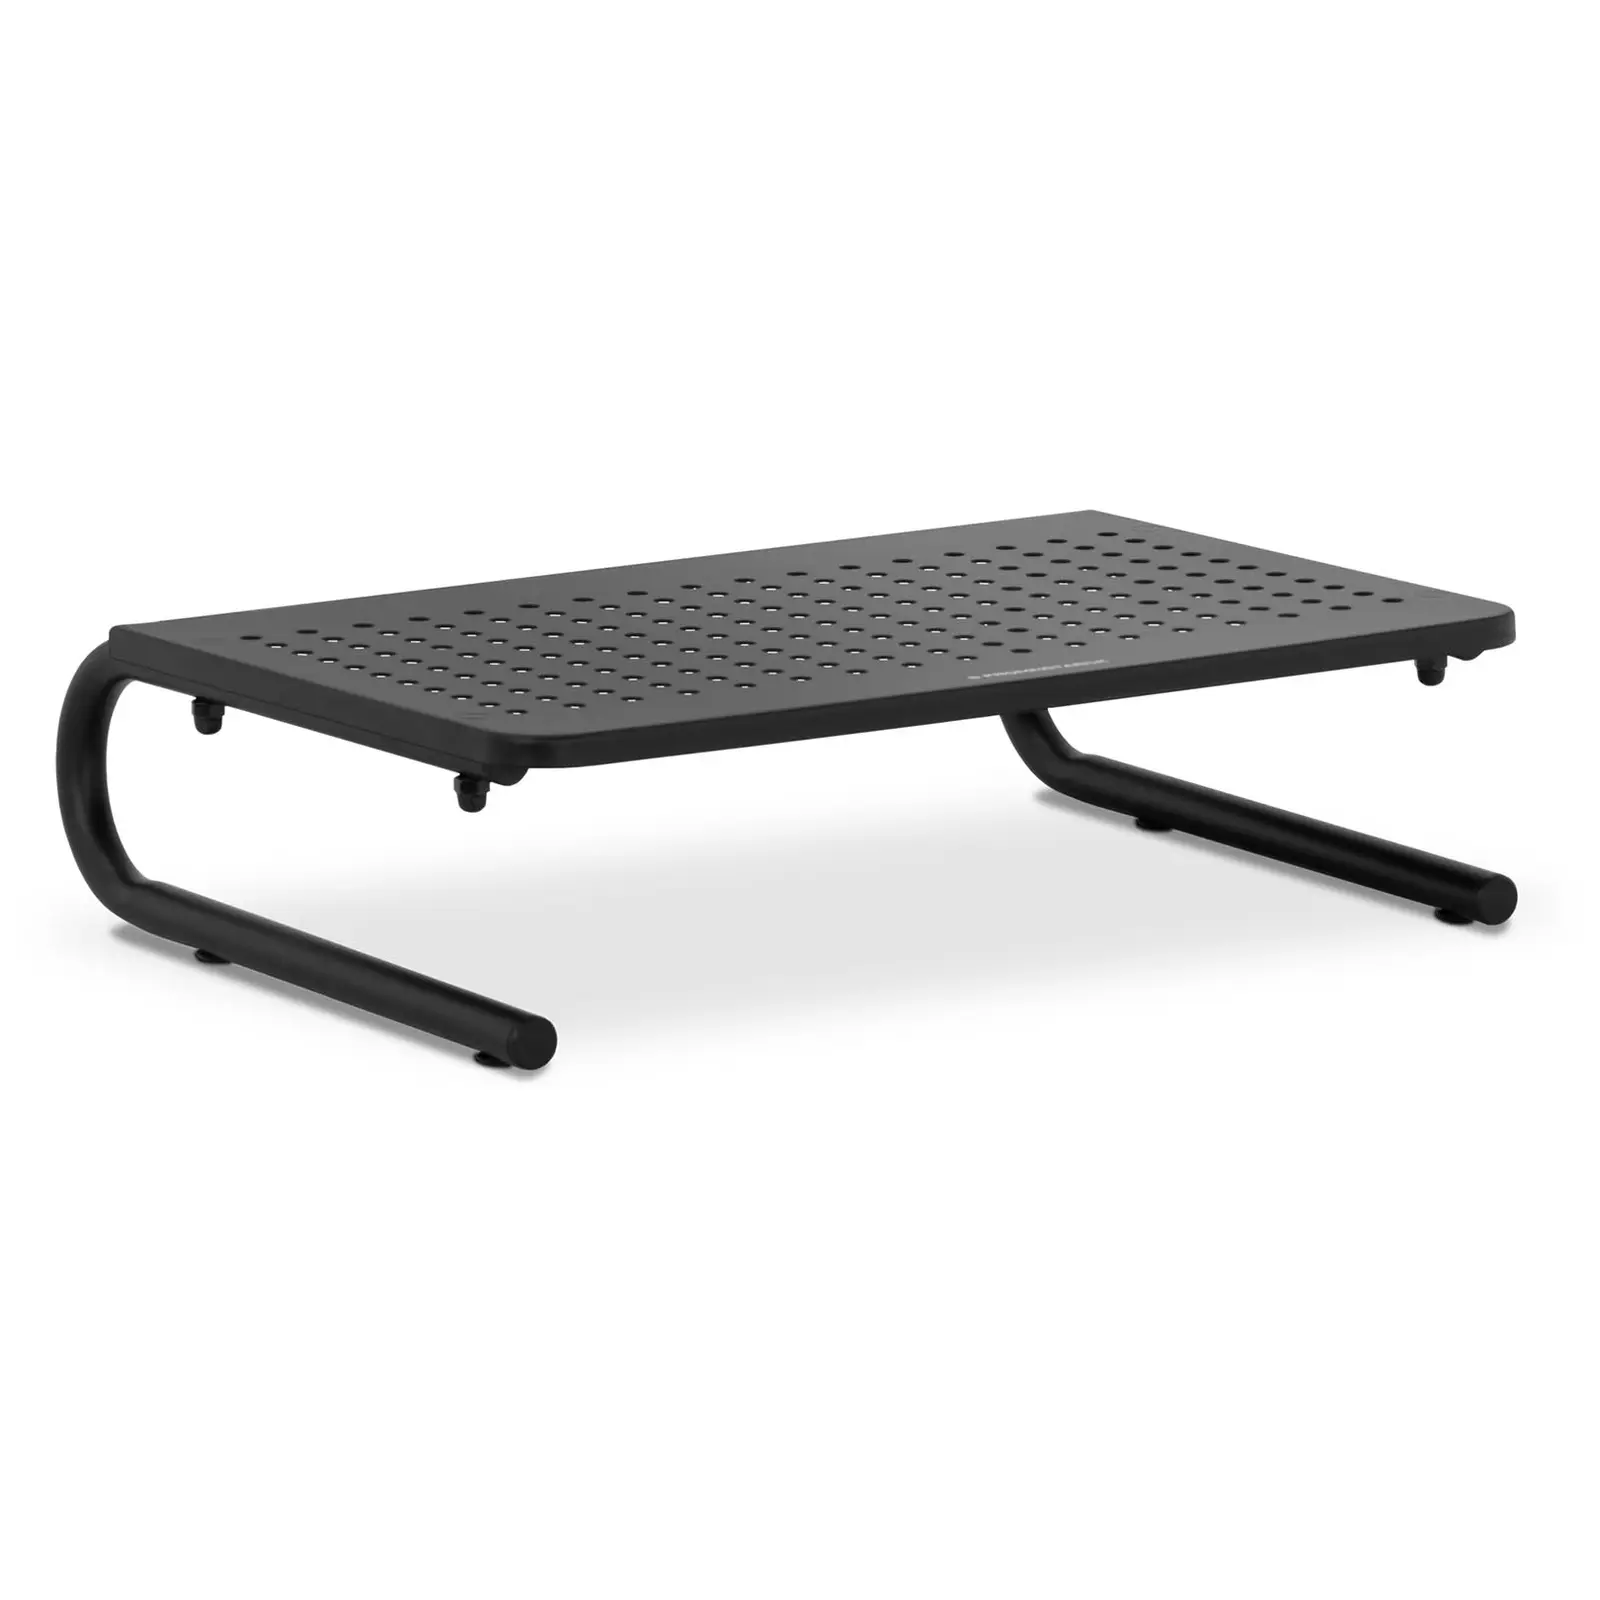 Monitor Stand - metal